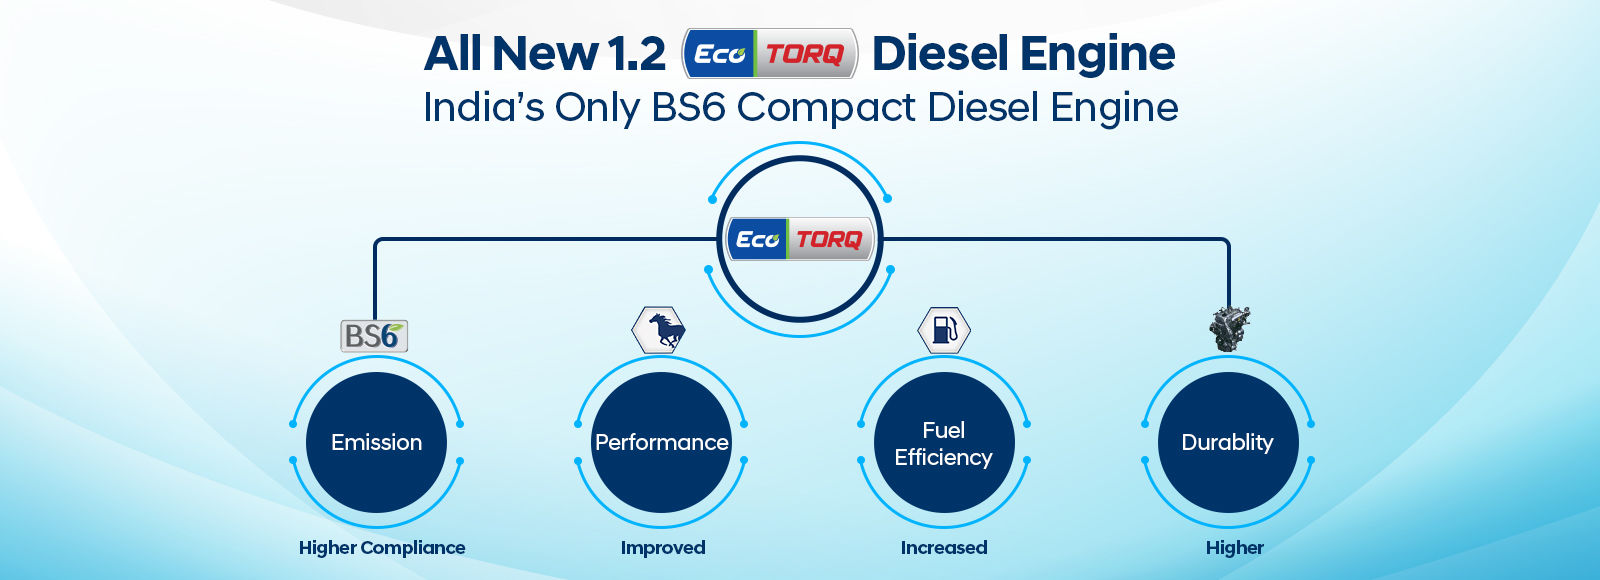 All New 1.2 Eco TORQ Diesel Engine